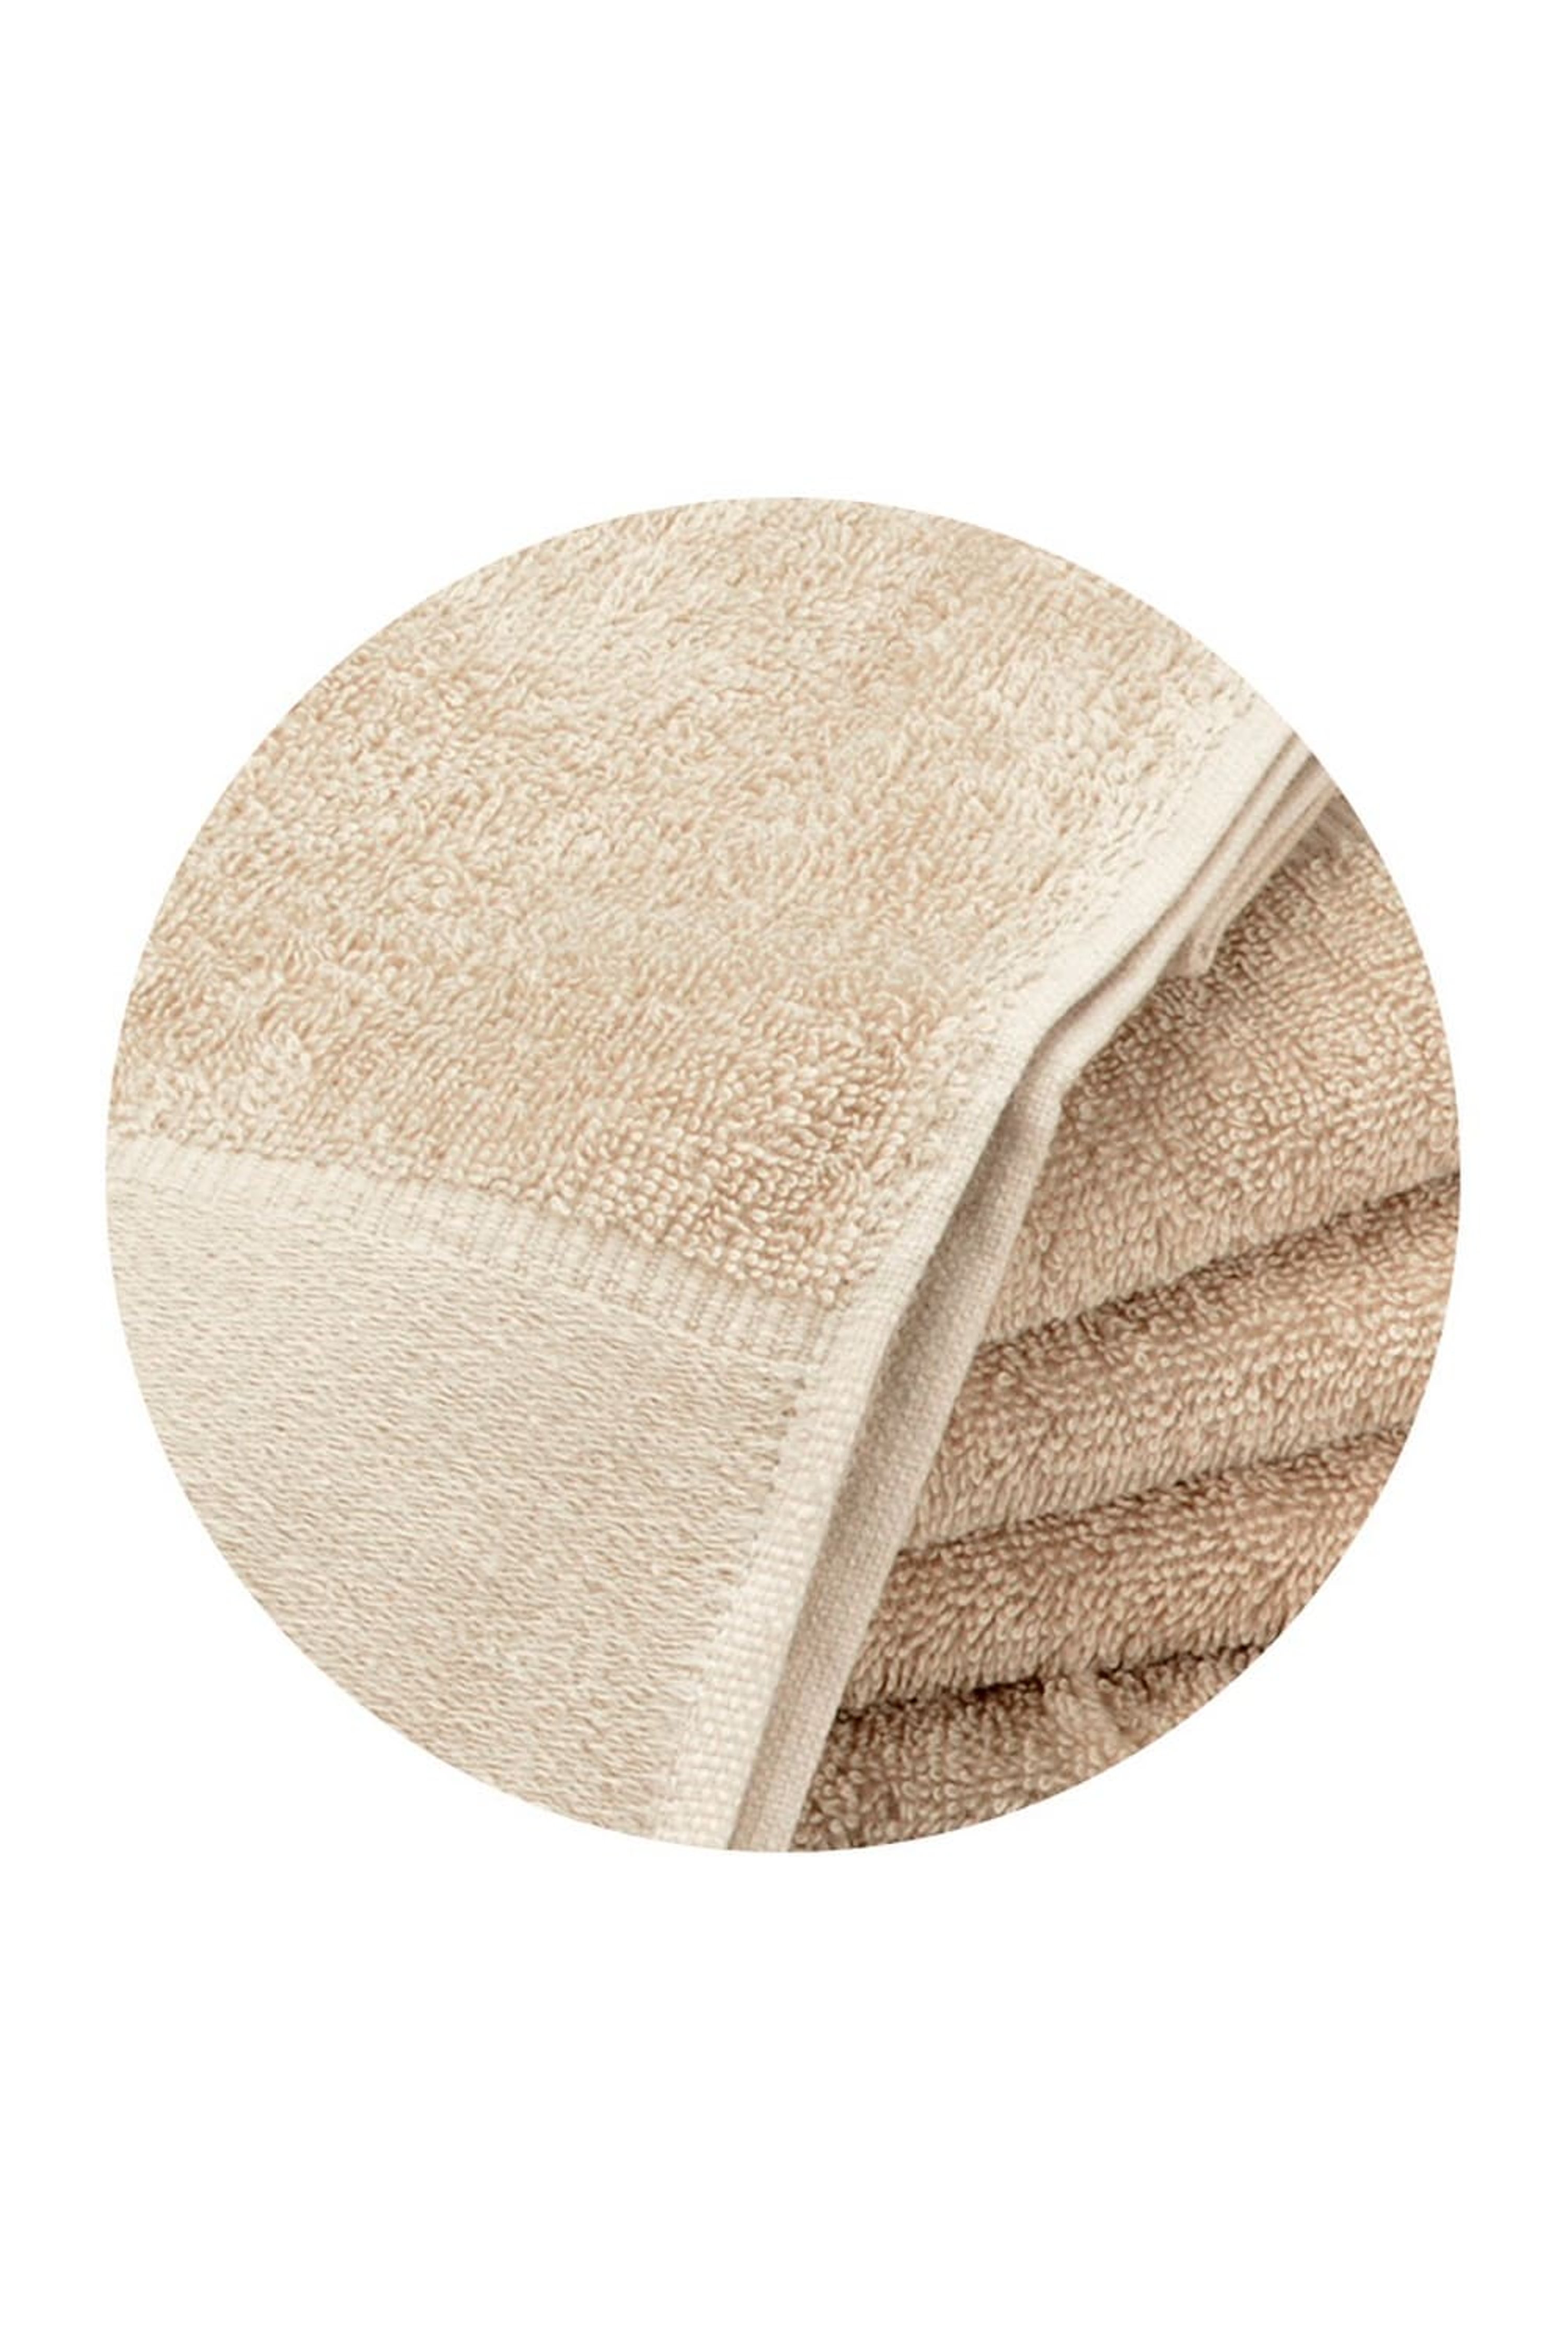 A&R TOWELS A&R TOWELS A&R TOWELS PRINT-ME GUEST TOWEL (SAND) (ONE SIZE)